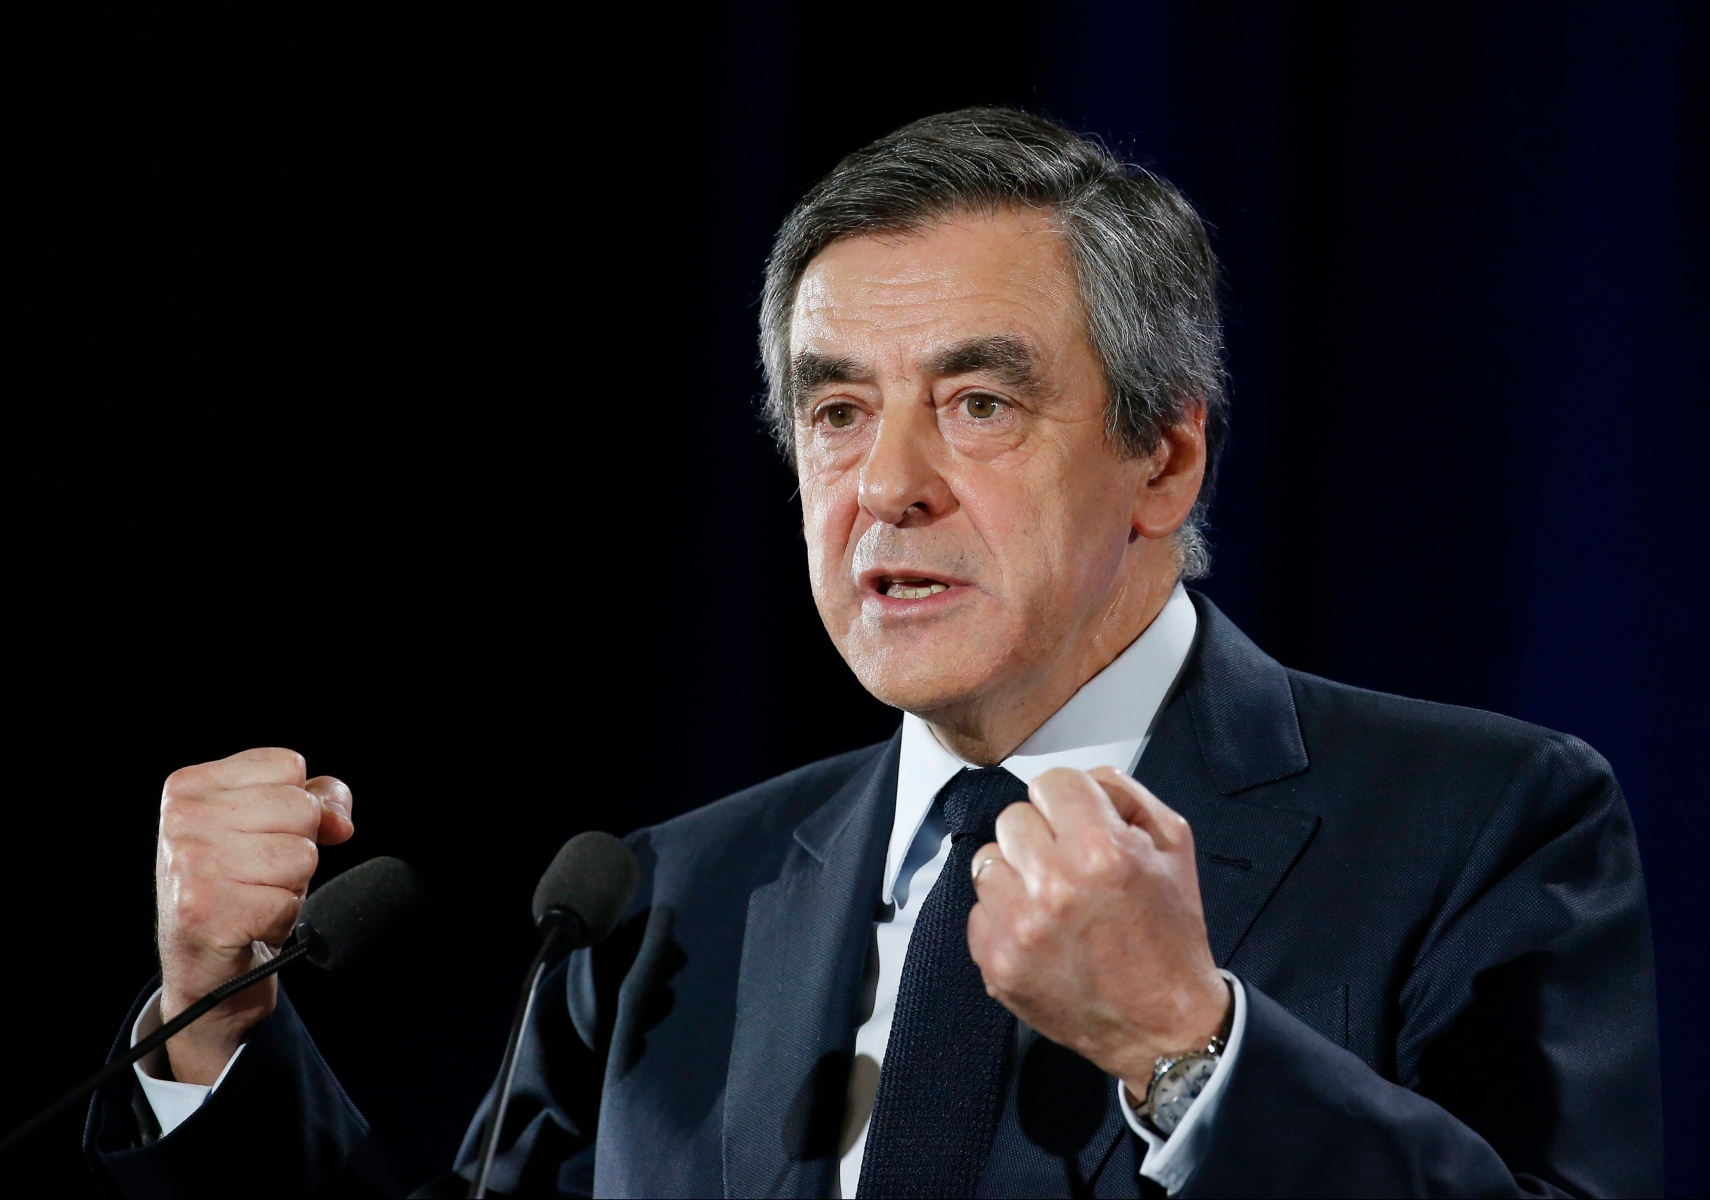 epa05767160 French Prime Minister and Les Republicains political party candidate for the 2017 presidential election Francois Fillon, speaks during a meeting in Charleville-Mezieres, France, 02 February 2017. According to media reports, Fillon has come under pressure to explain the previous employment of his wife Penelope as a parliamentary aide while he was an MP and to give details of her work. He has also been hit by new claims that he also employed his children as 'parliamentary assistants'. French MPs are allowed to employ family members as aides.  EPA/JULIEN WARNAND FRANCE PRESIDENTIAL ELECTIONS CAMPAIGN